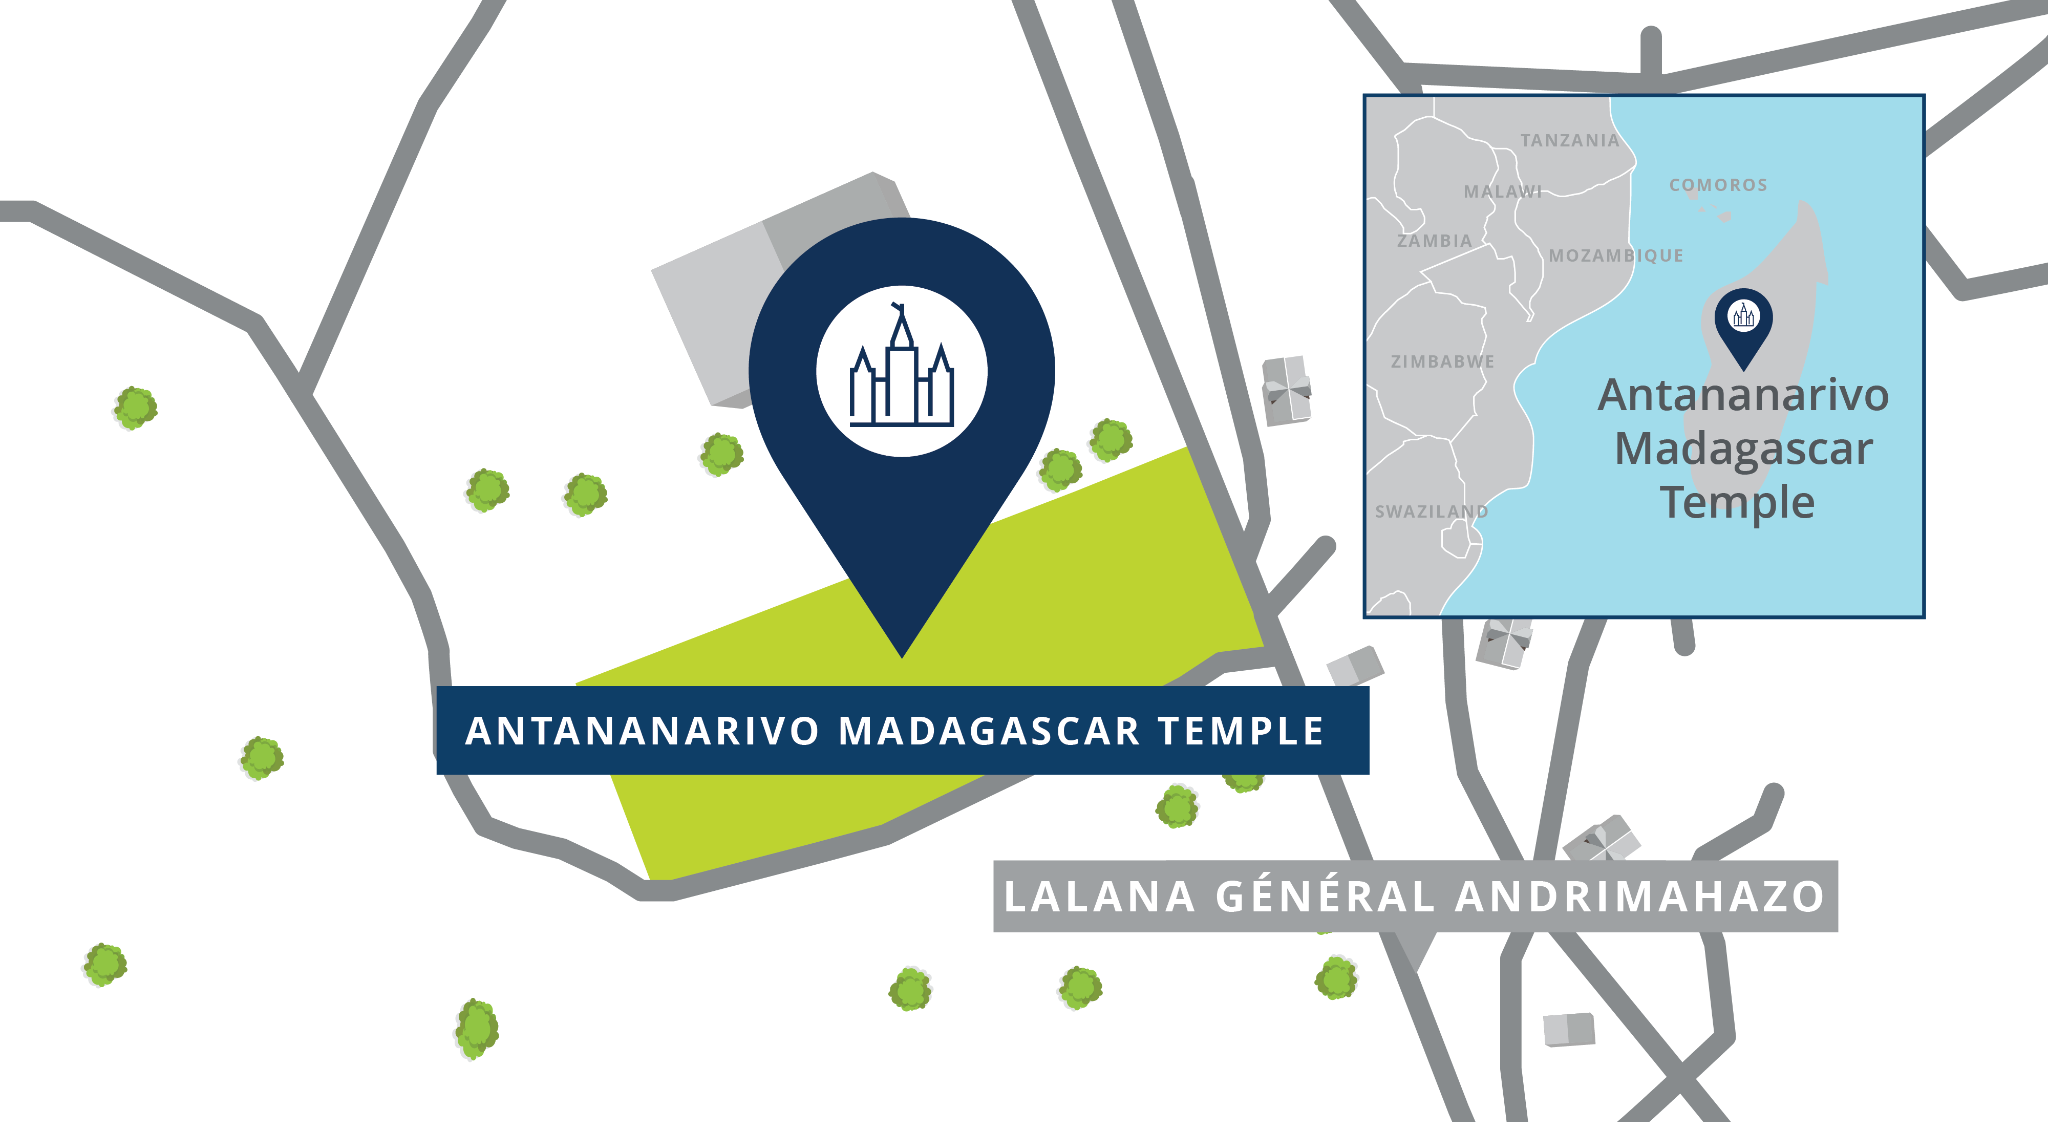 A map of a pin showing the location of the Antananarivo Madagascar Temple site, with nearby roads.